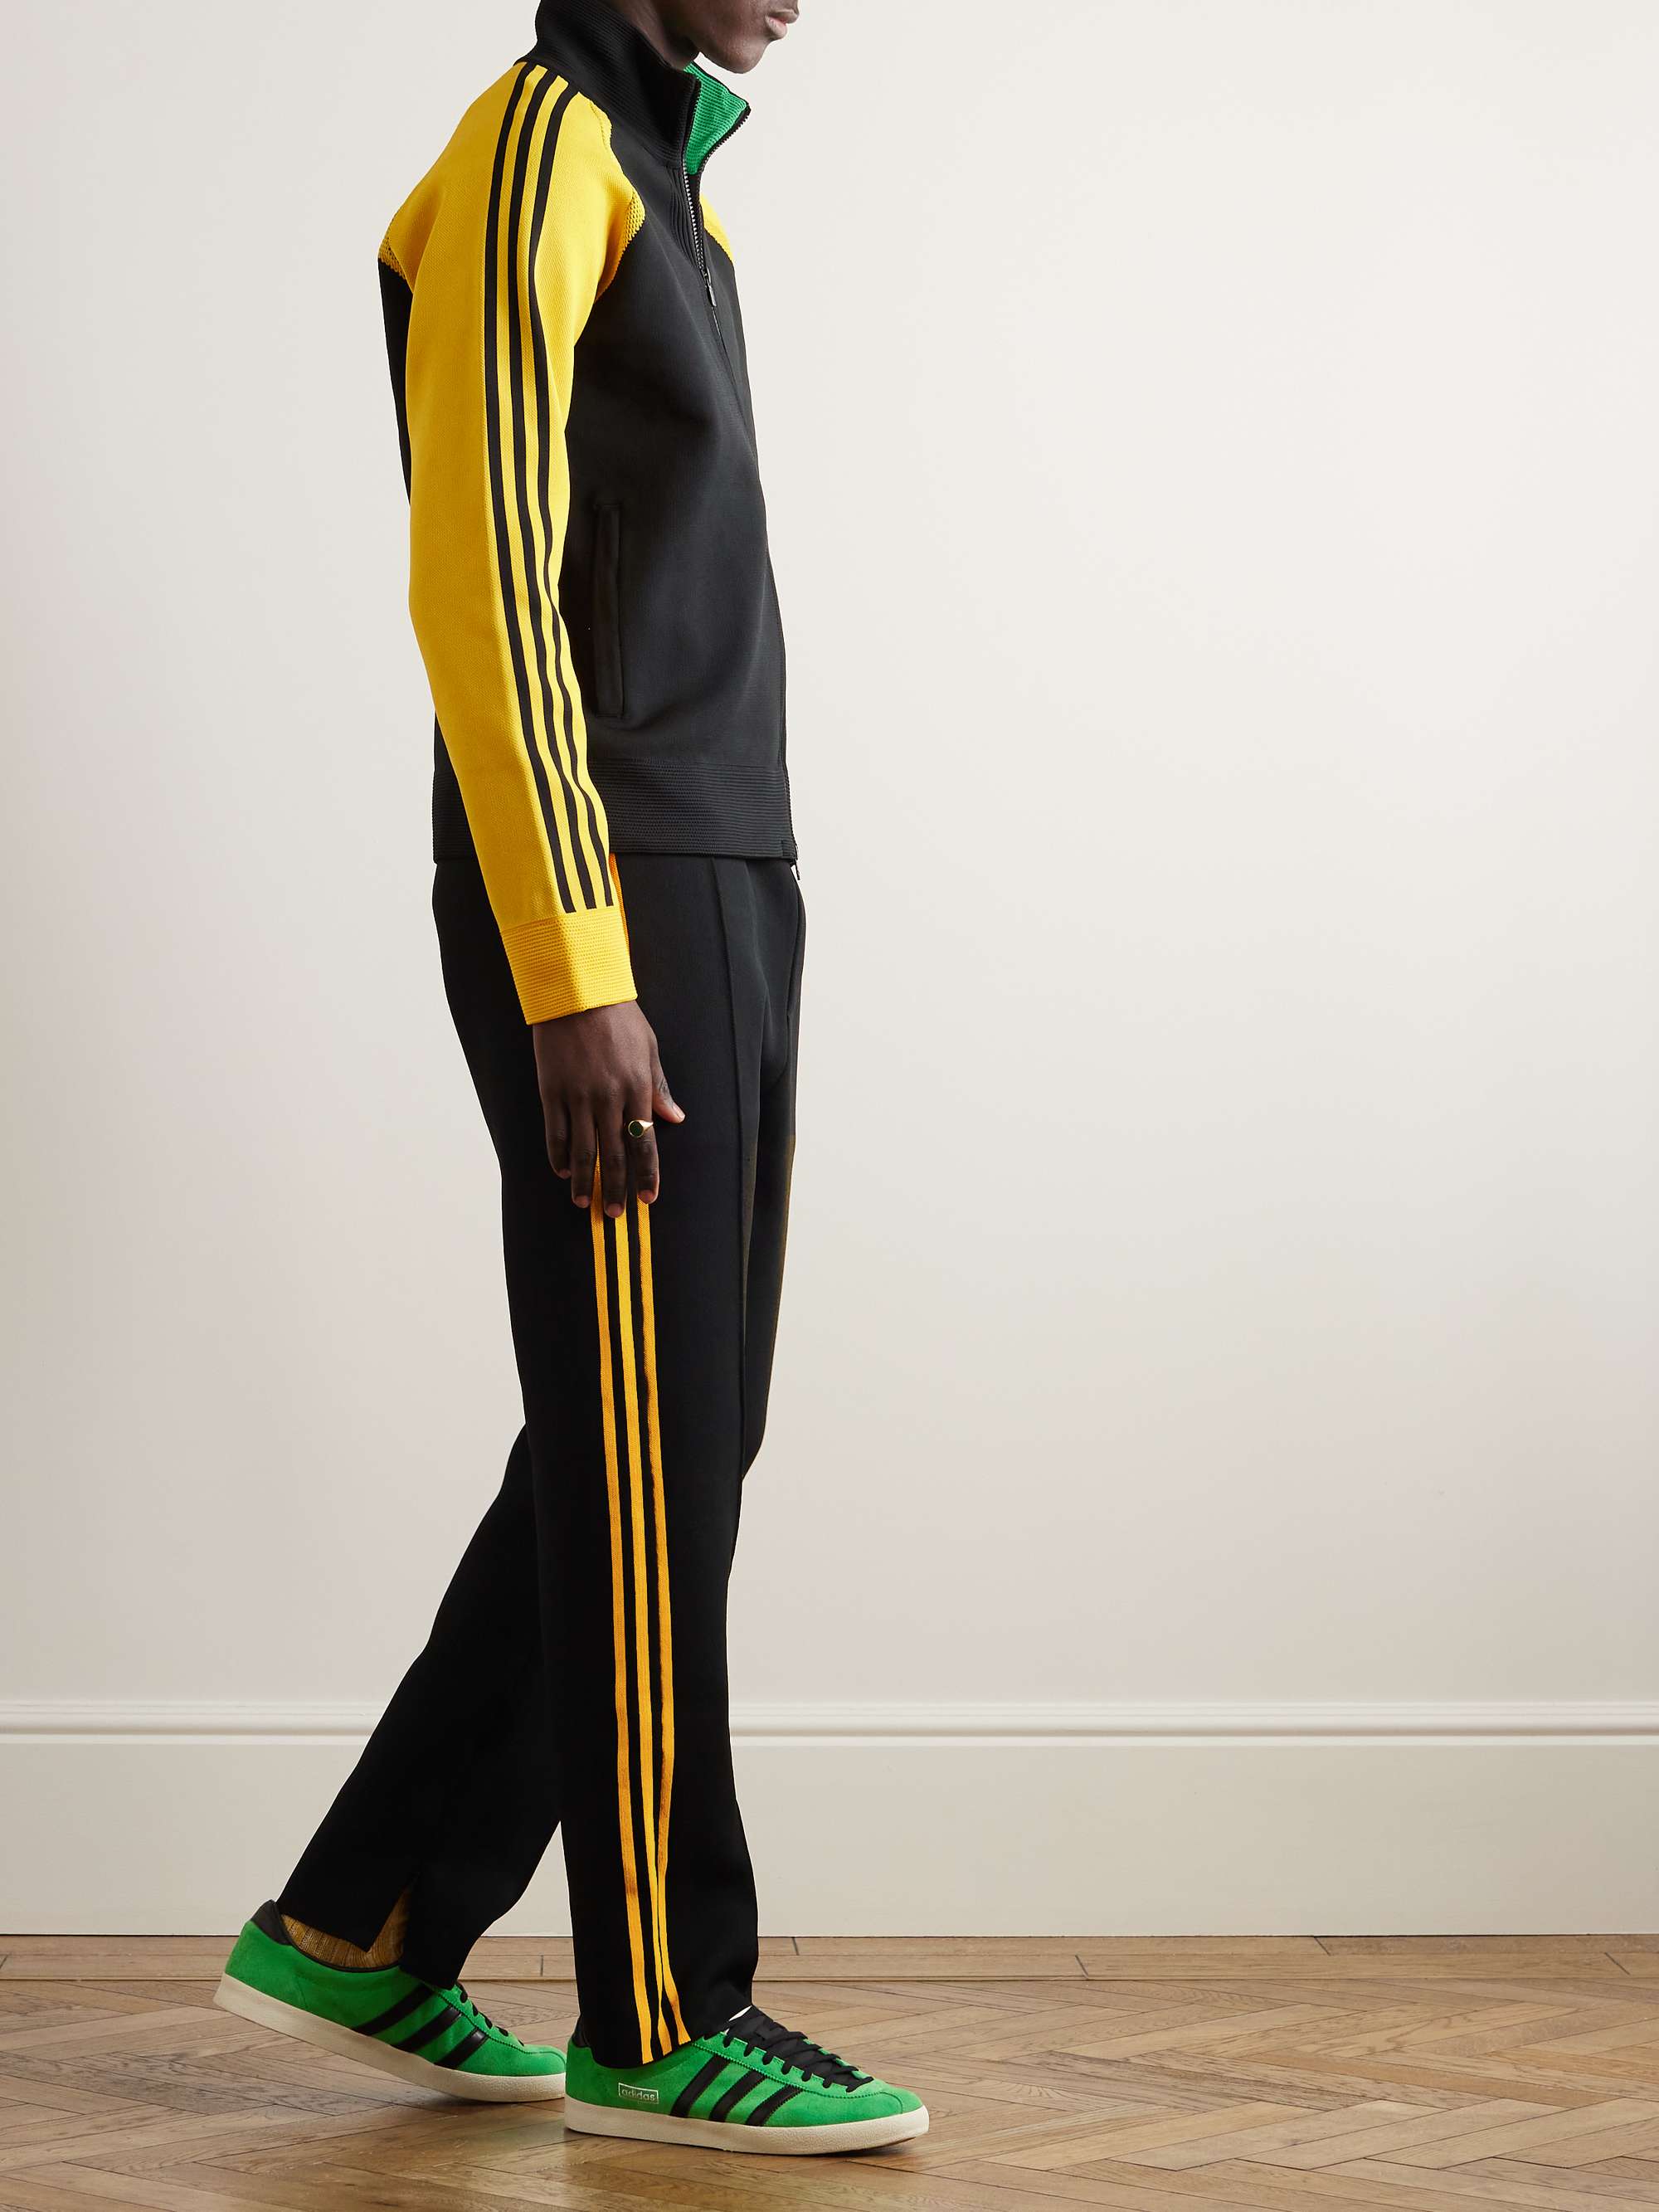 ADIDAS CONSORTIUM + Wales Bonner Slim-Fit Straight-Leg Striped Pleated  Knitted Sweatpants | MR PORTER